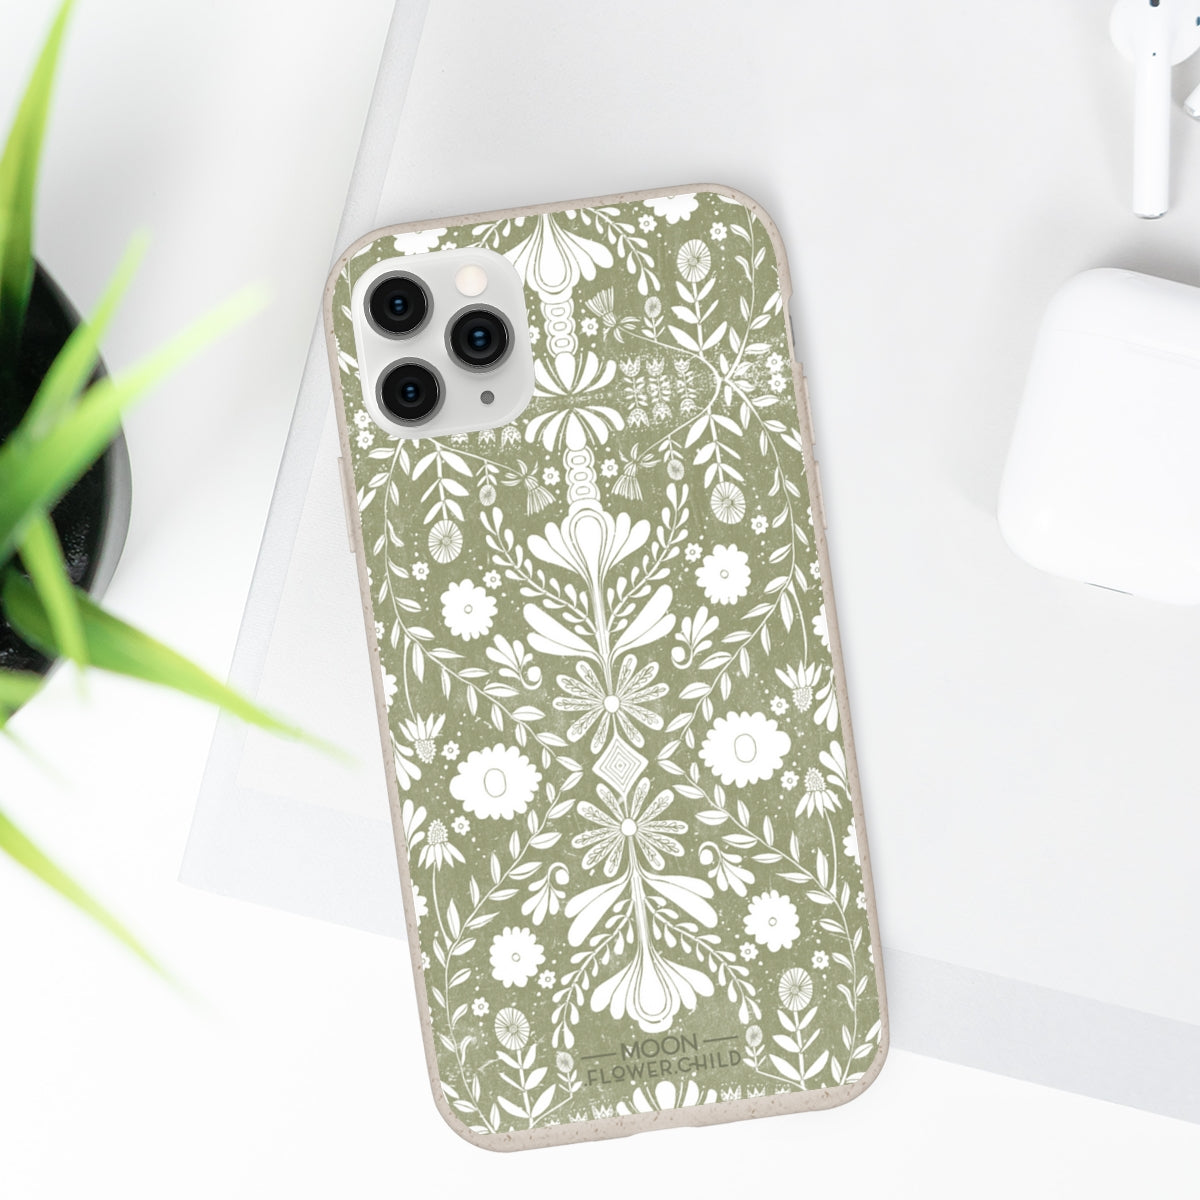 Biodegradable Cases [Earth]